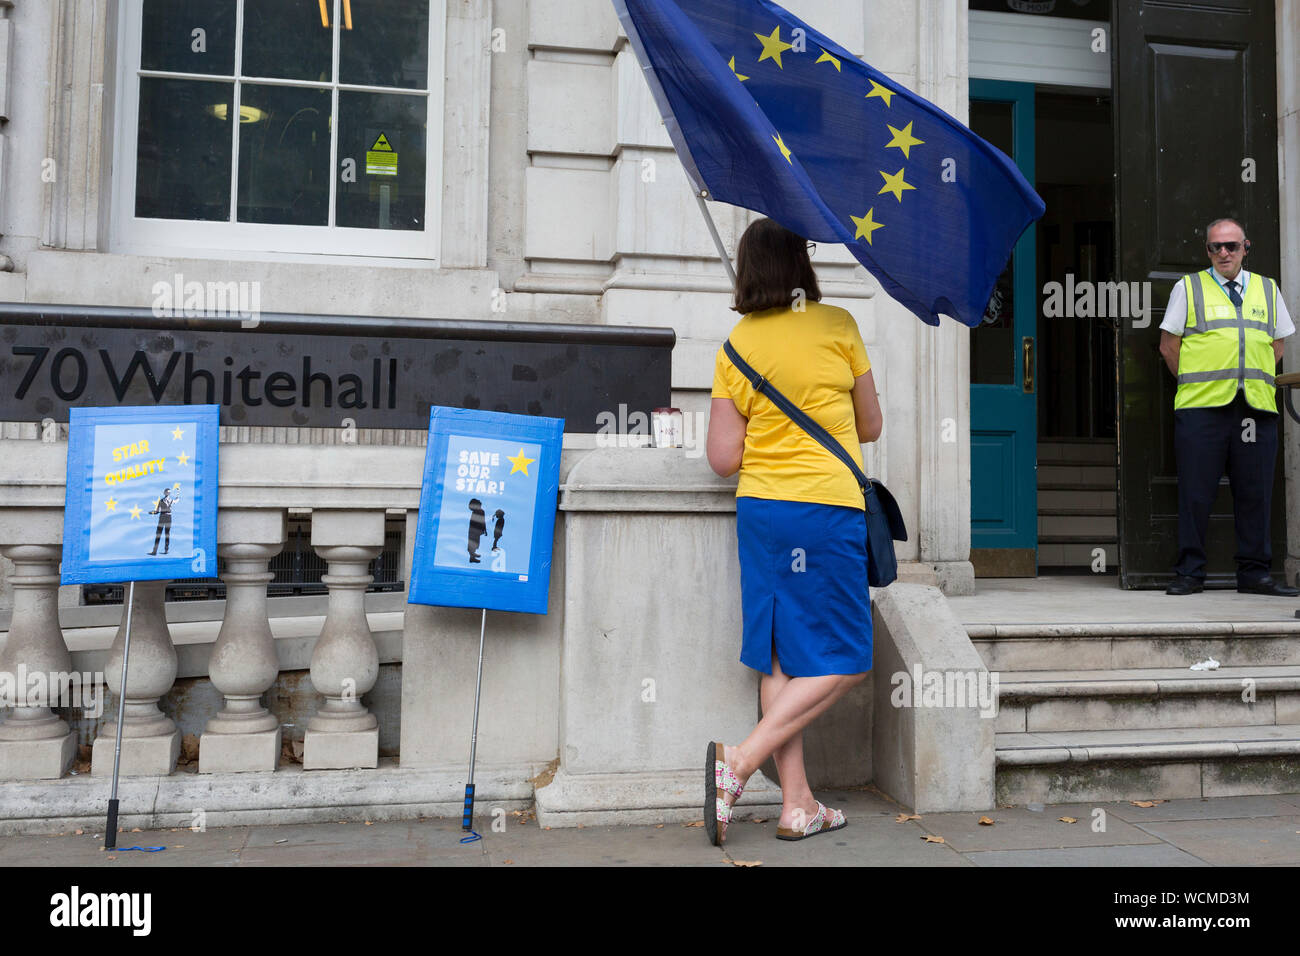 On the day that British Prime Minister Boris Johnson sought to have Parliament suspended by Queen Elizabeth, days after MPs return to work in September - and only a few weeks before the Brexit deadline, pro-EU Remain voters protest outside the Cabinet Office where daily Brexit contingency planning meetings take place, on 28th August 2019, in Whitehall, Westminster, London, England. Stock Photo